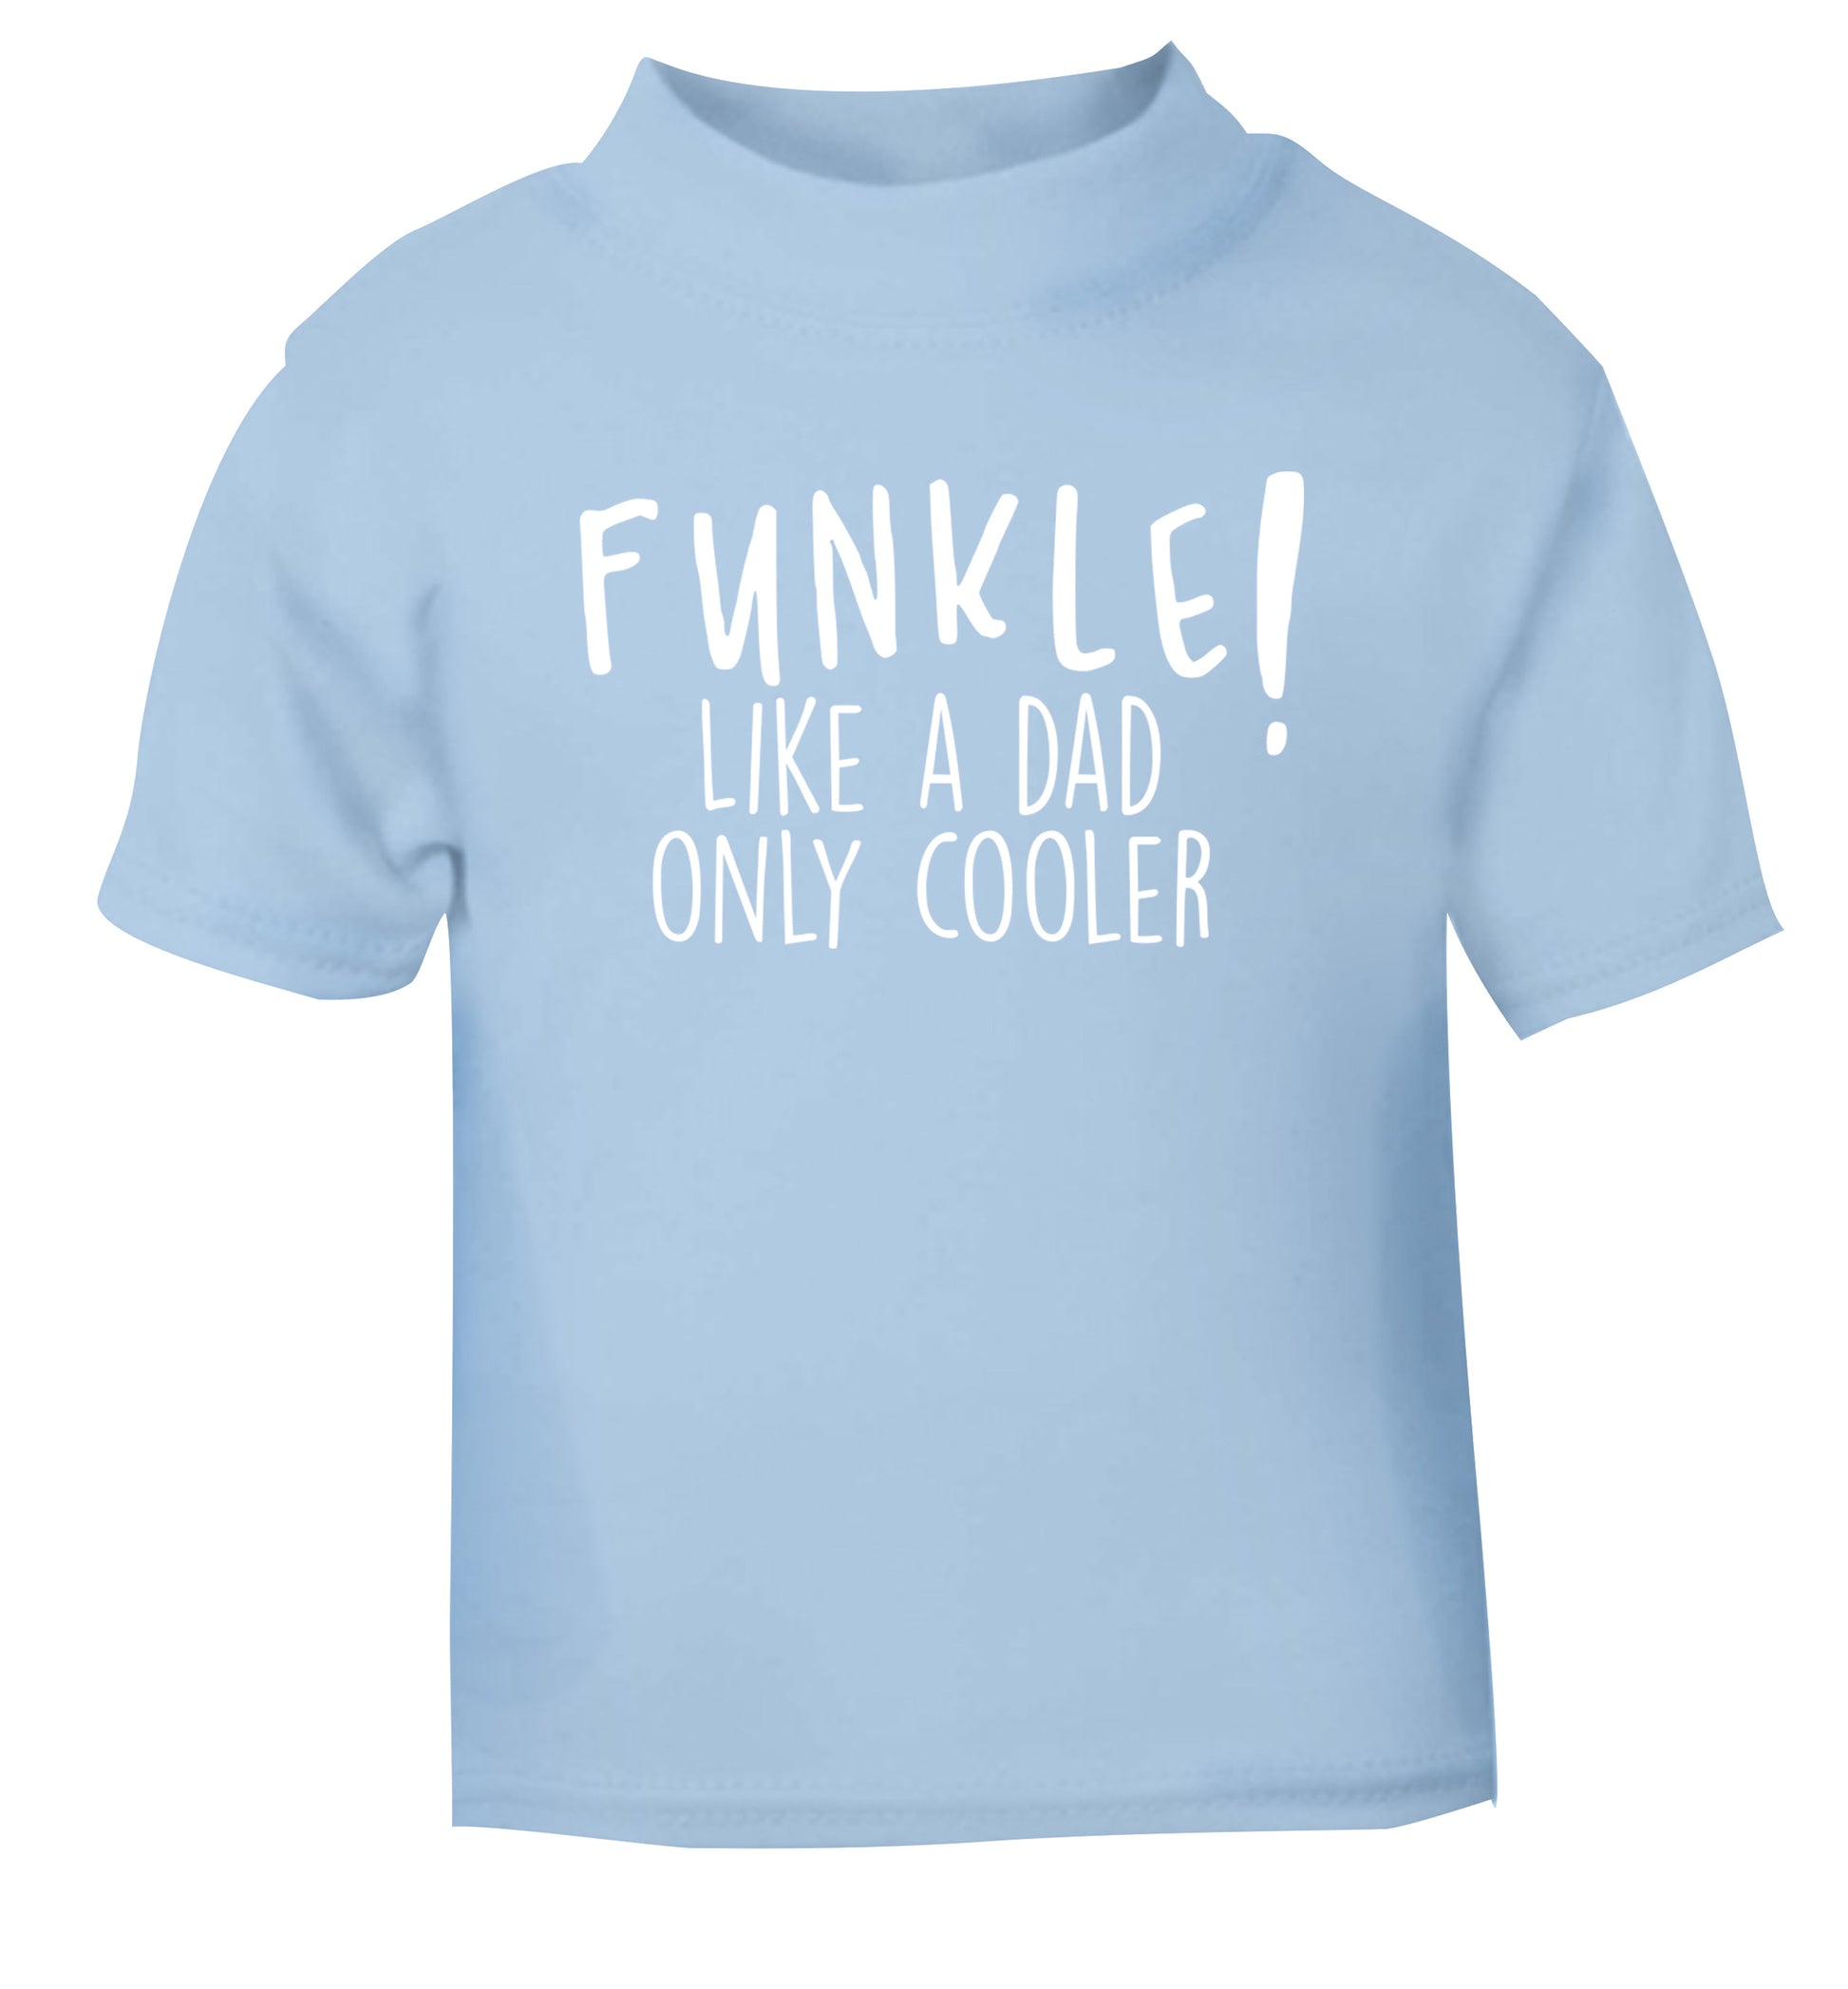 Funkle Like a Dad Only Cooler light blue Baby Toddler Tshirt 2 Years